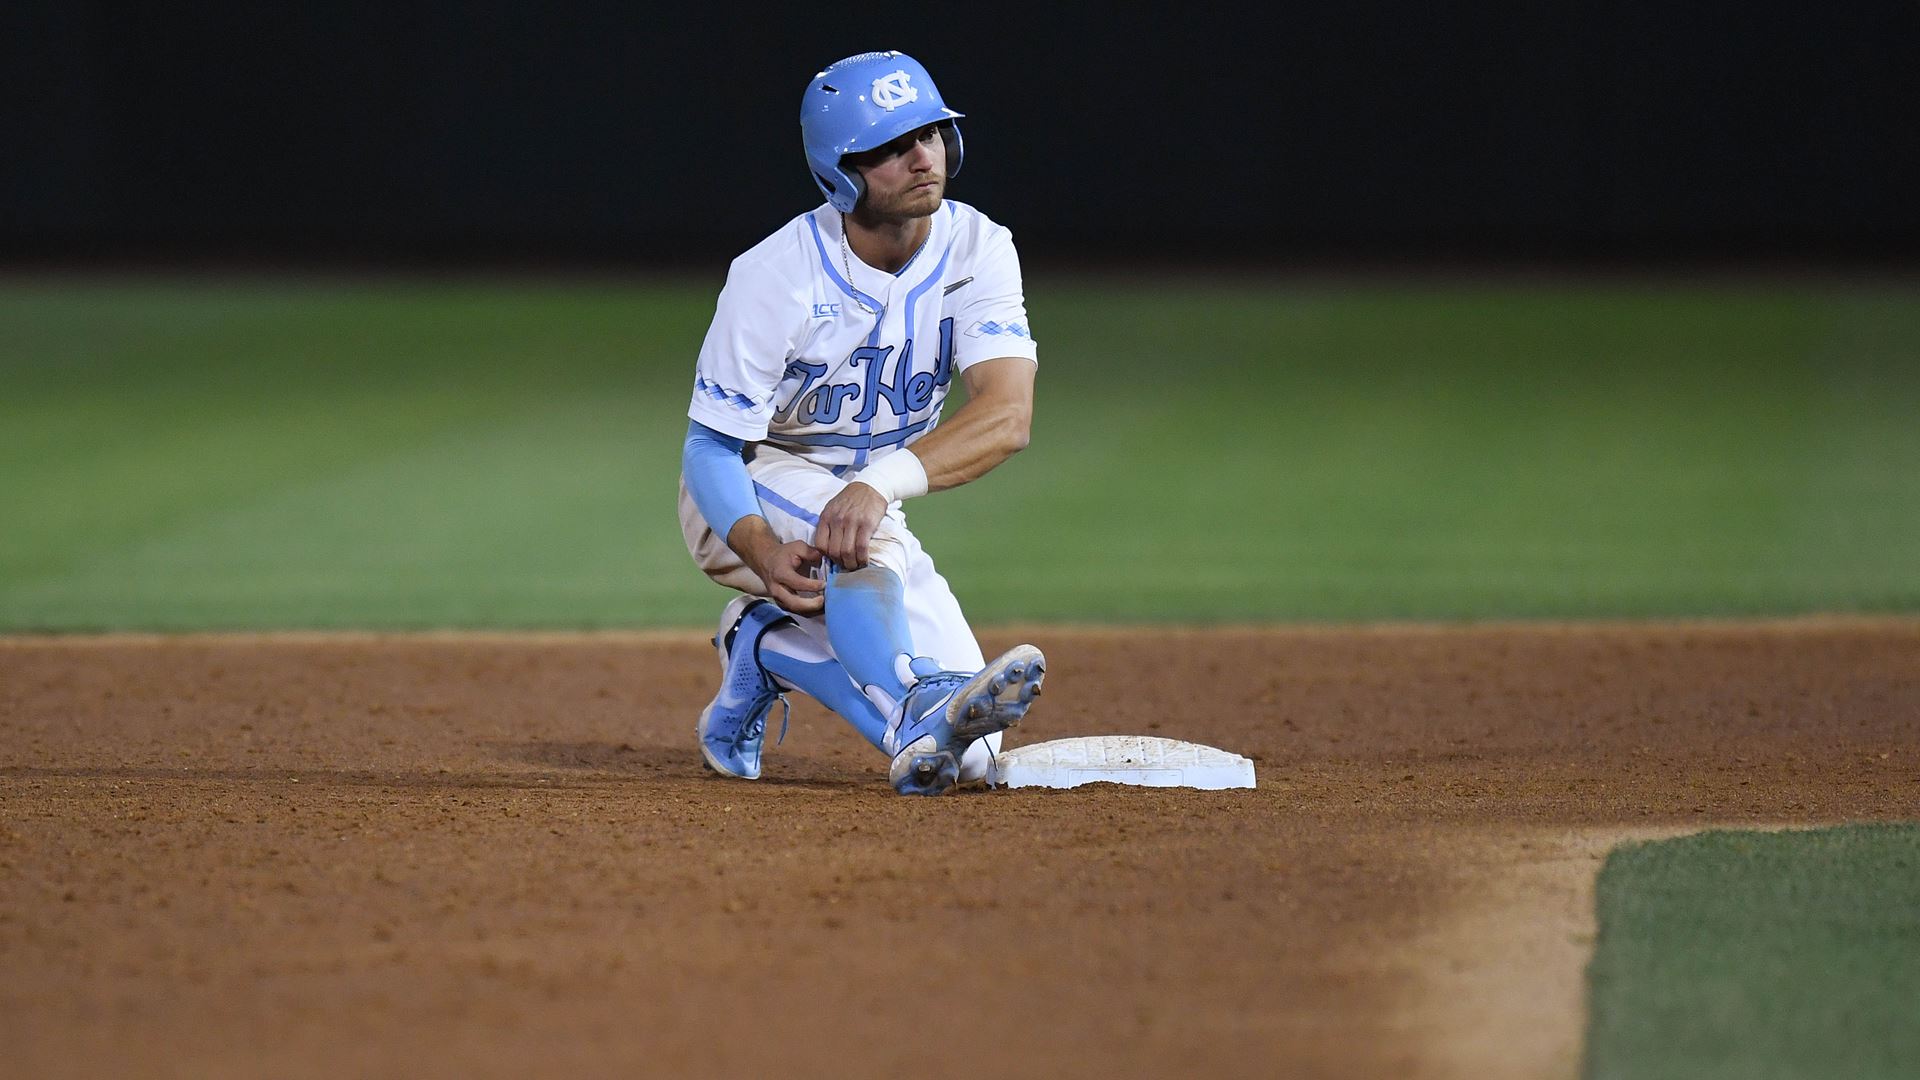 UNC Baseball Swept By Virginia on the Road